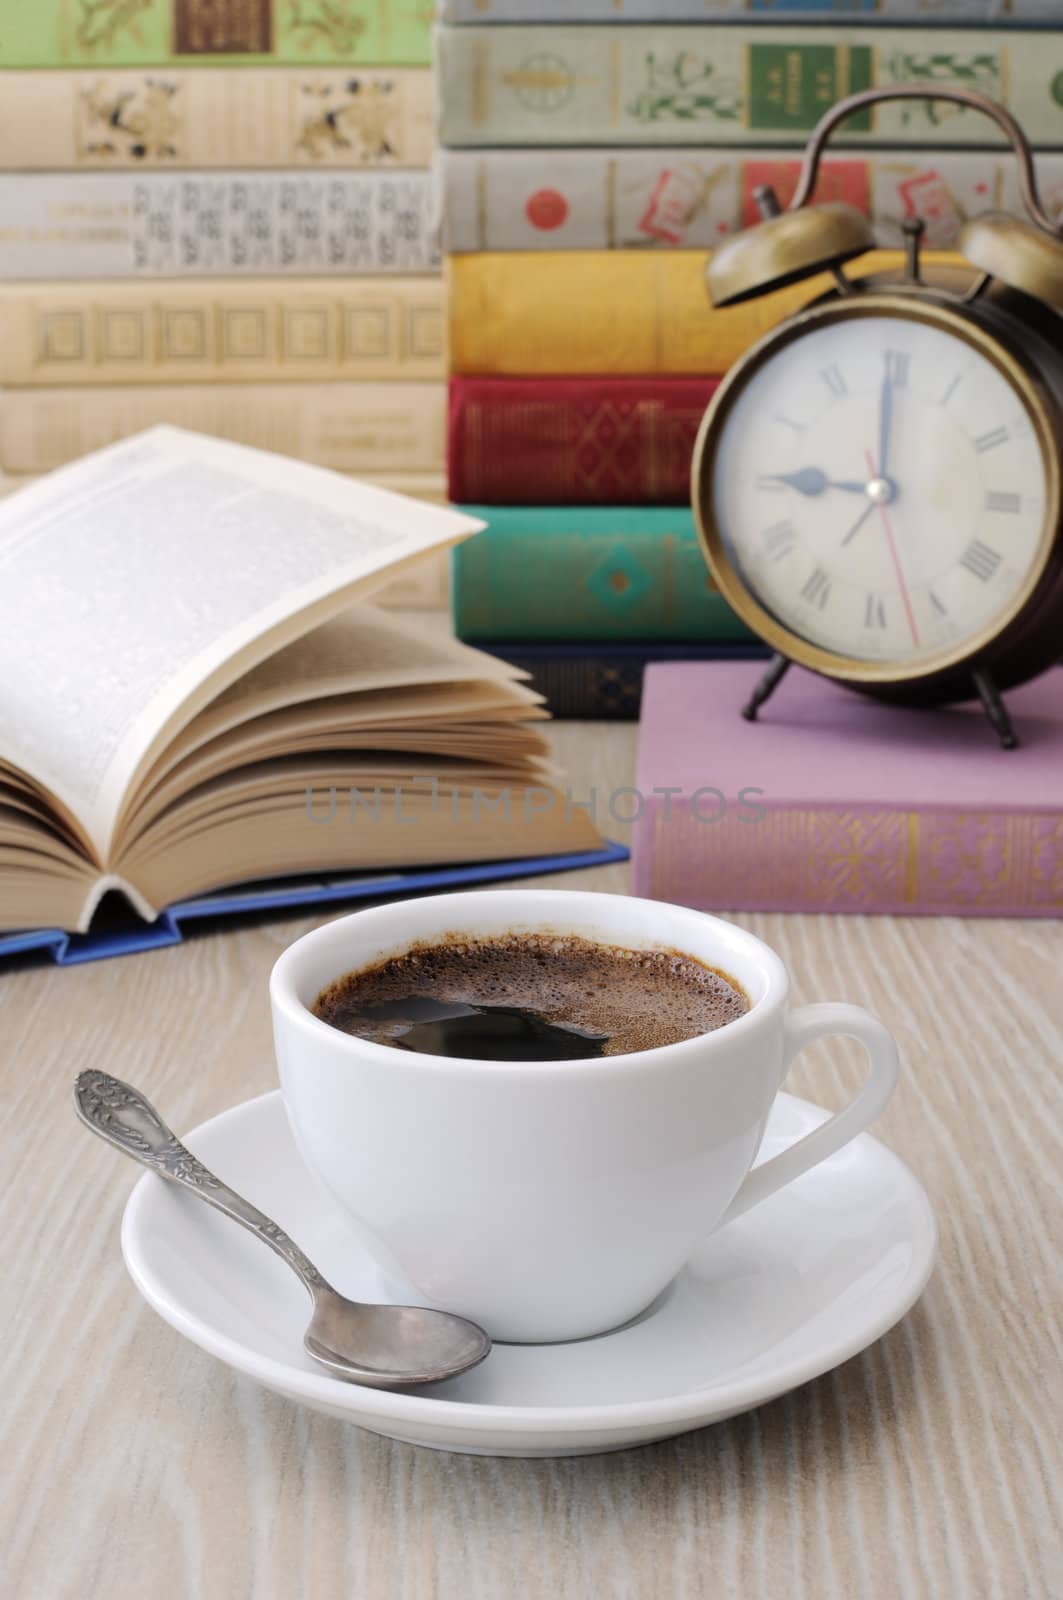 A cup of coffee on the table against the background of an open book with a clock and a stack of books